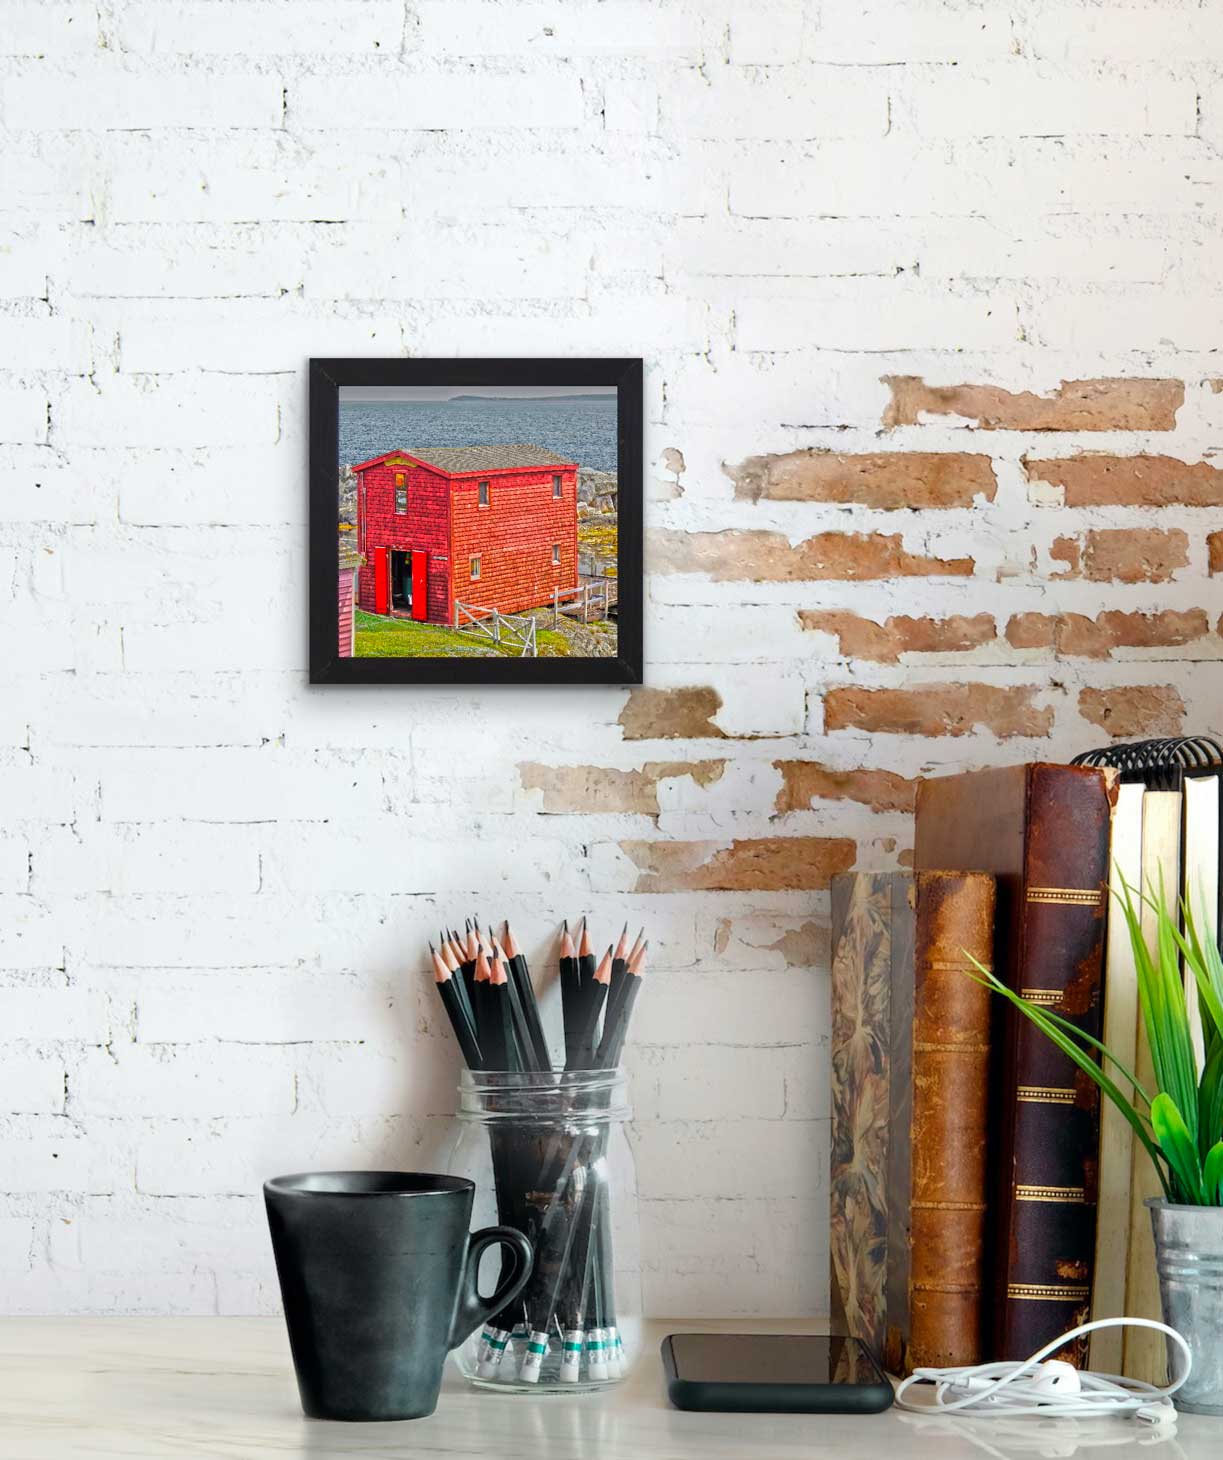 Spectacular view of Blue Rocks harbour featuring a picturesque red barn.   Photography 7.5 x 7.5 inches covered with resin in a handmade black wooden frame 9 x 9 inches.  Ready-to-hang in your favorite room.